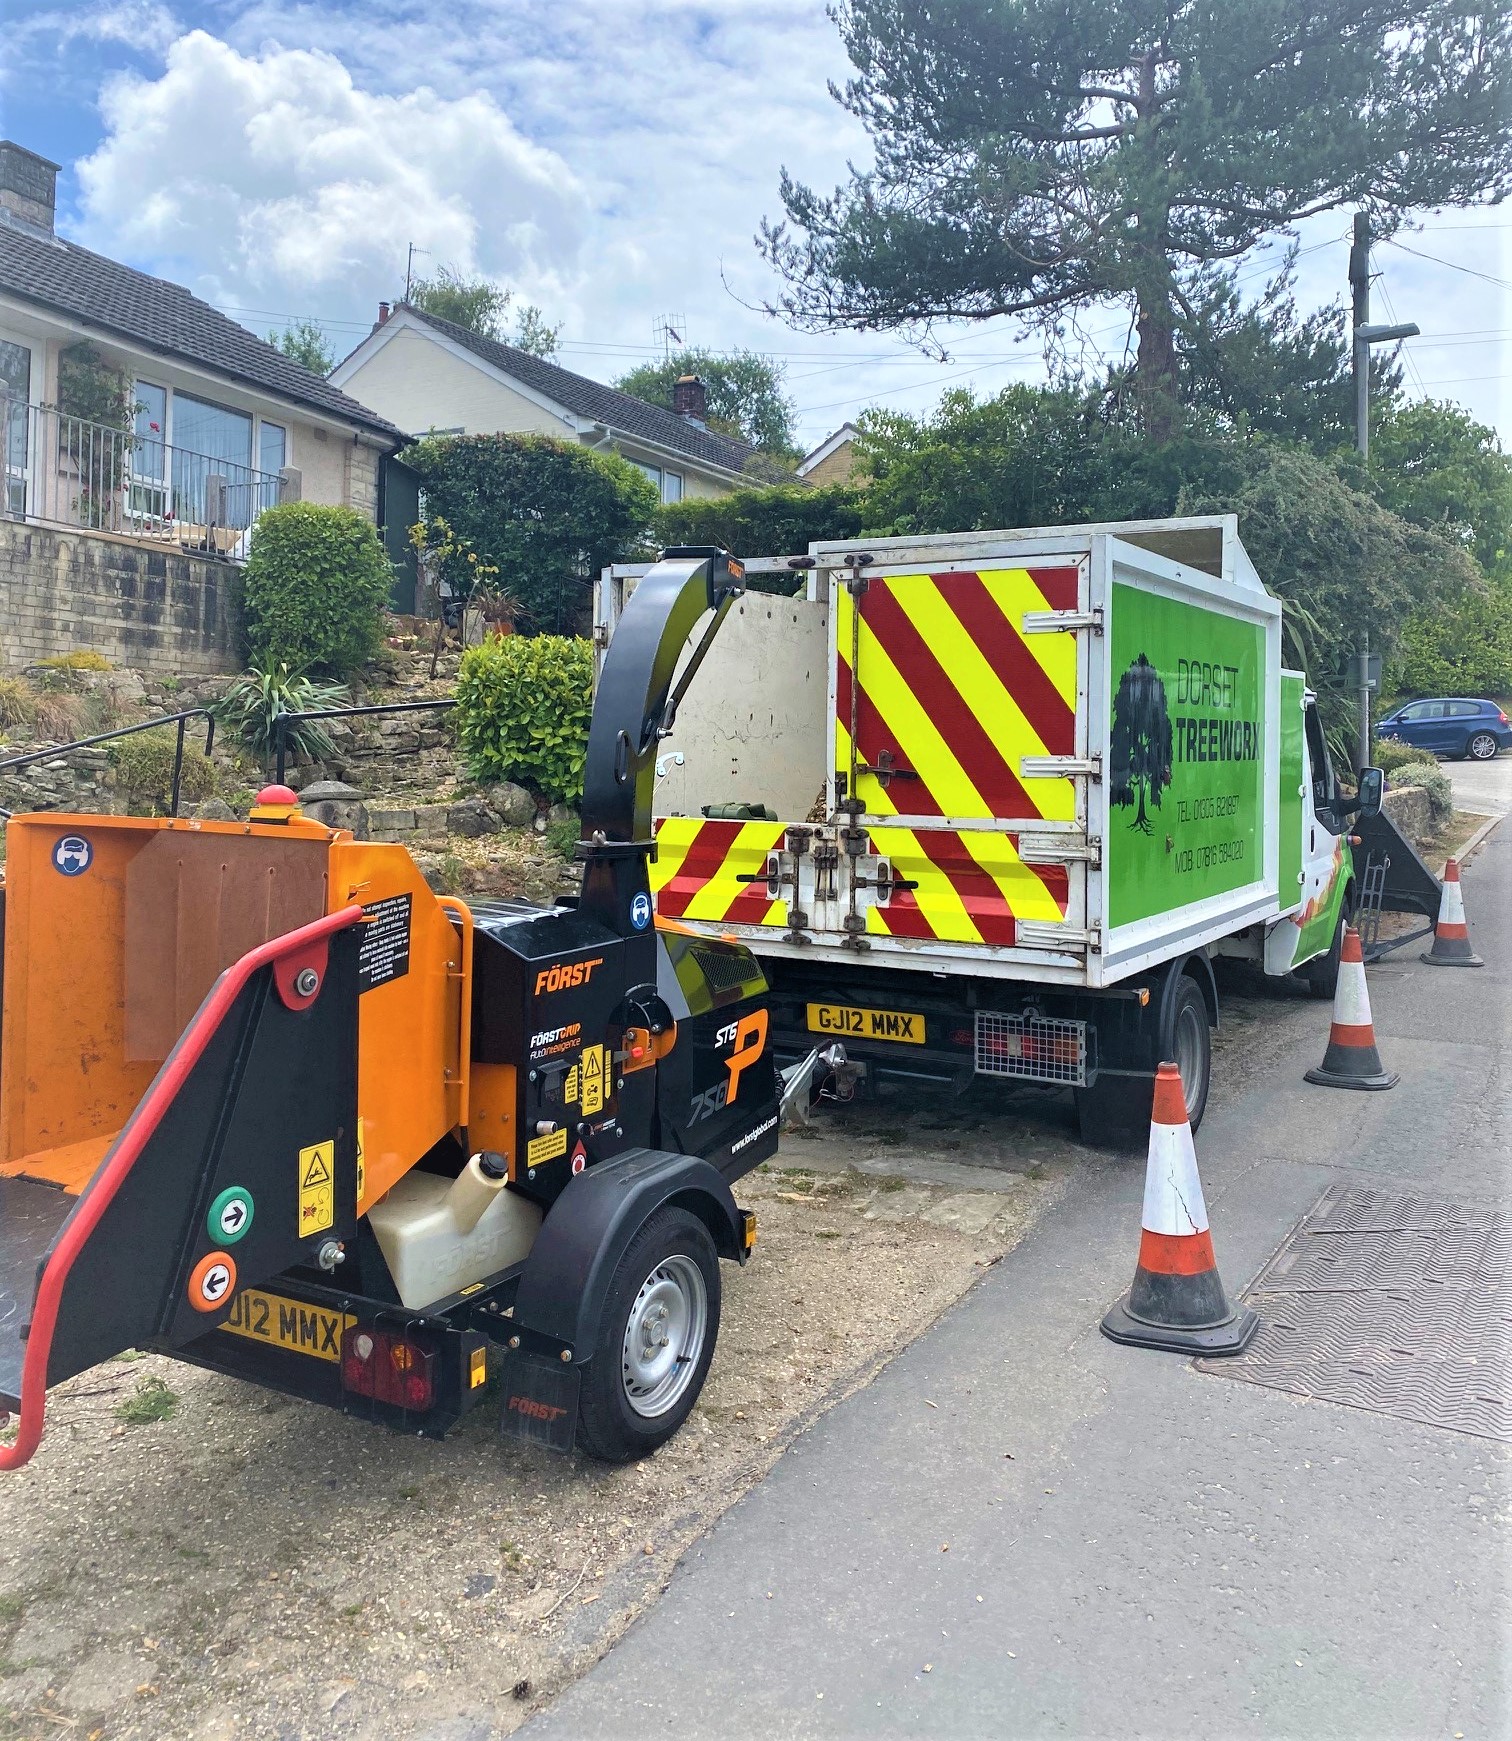 Dorchester tree surgeon team in south Dorset covering Dorchester town and surrounding village areas. Professional arborist team offering tree care, tree removal, tree felling, hedge trimming, hedge removal, stump grinding services.